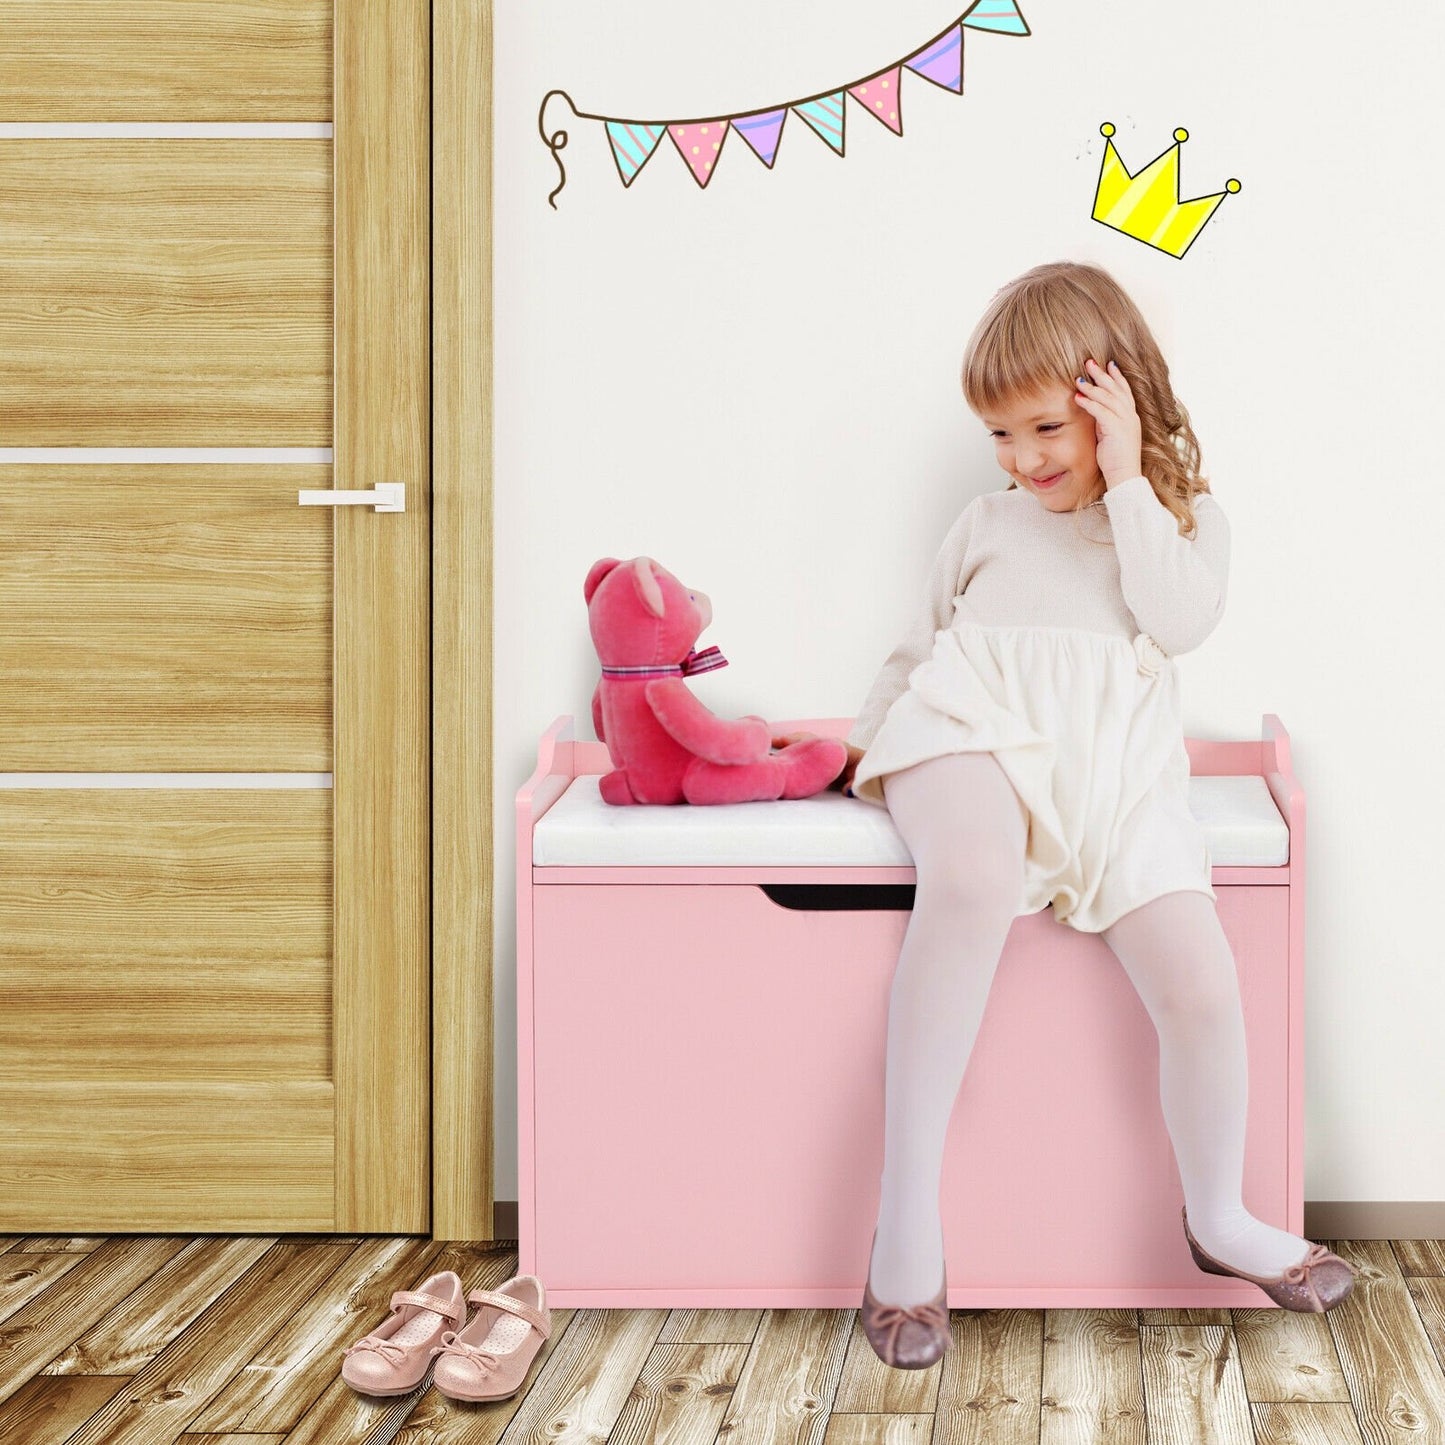 Kids Toy Wooden Flip-top Storage Box Chest Bench with Cushion Hinge, Pink - Gallery Canada